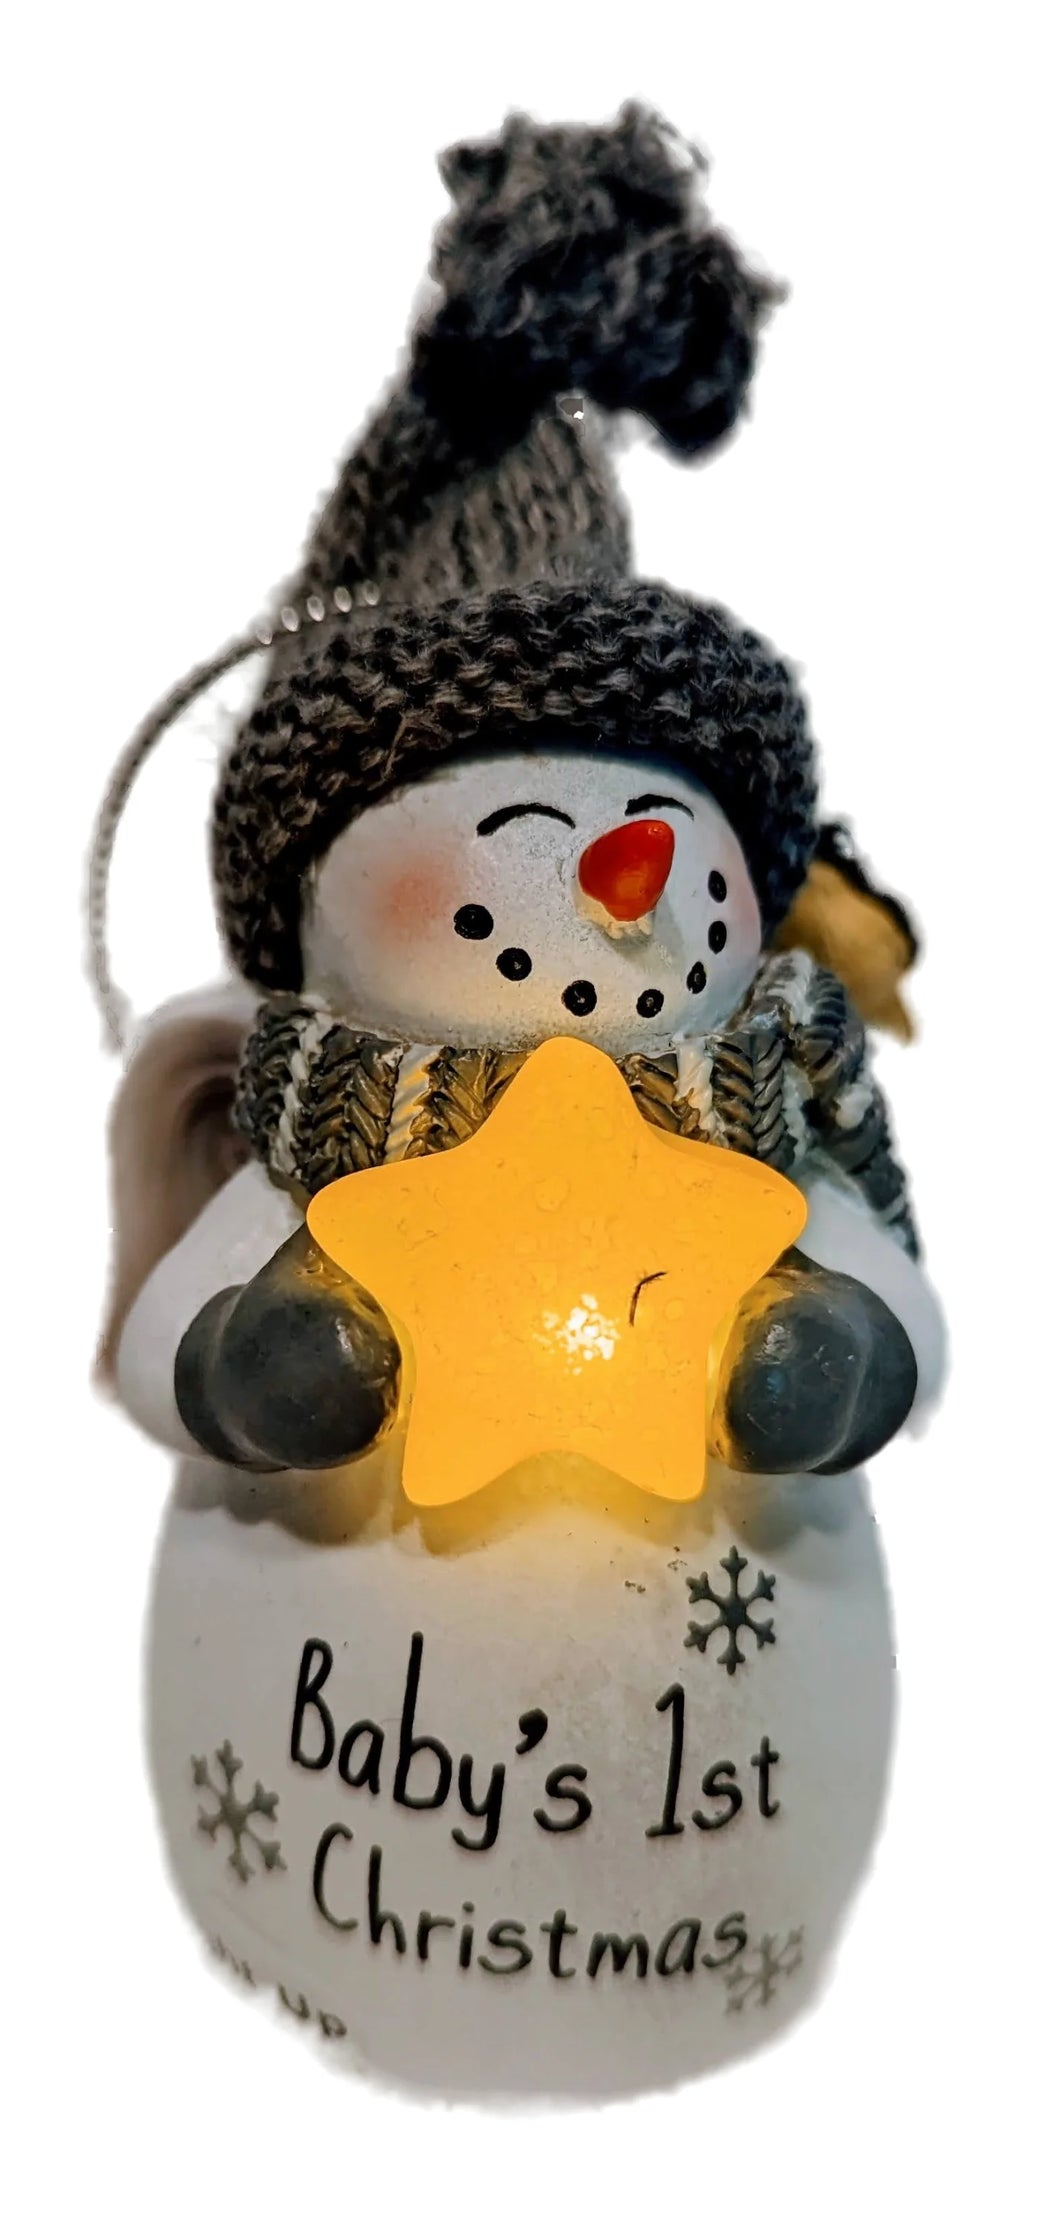 Snowman Angel Ornament Holding Light Up Star - Baby's 1st Christmas